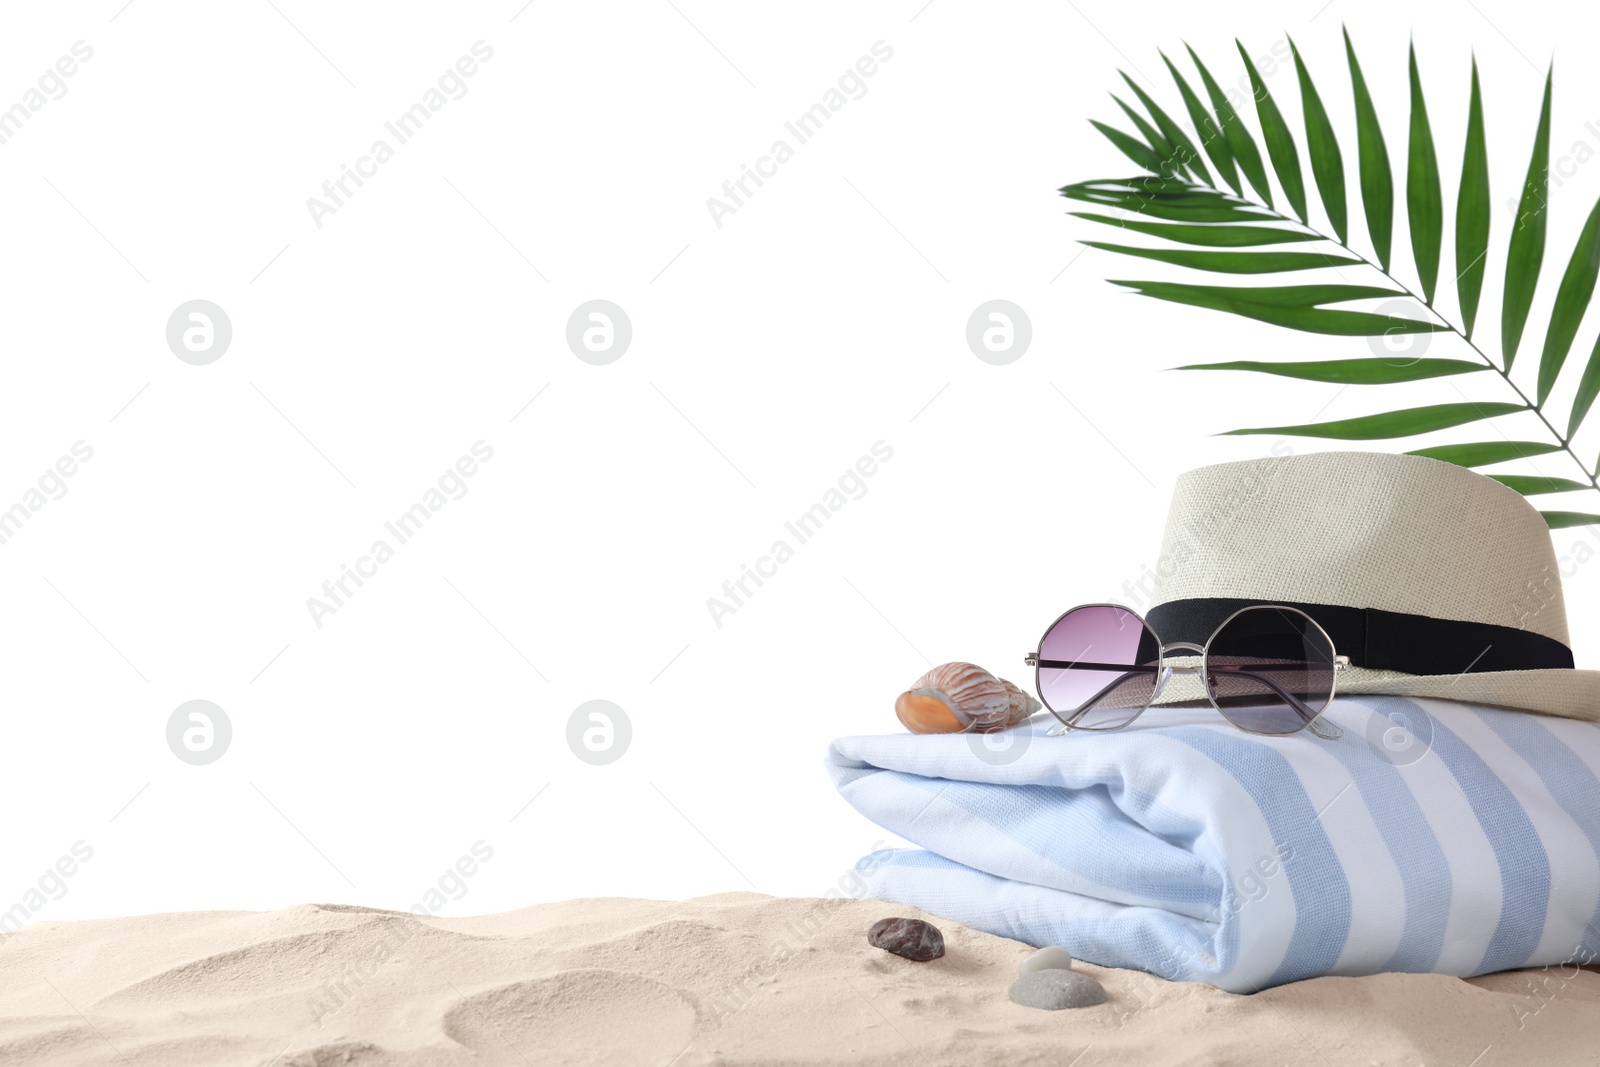 Photo of Composition with beach objects on sand against white background, space for text